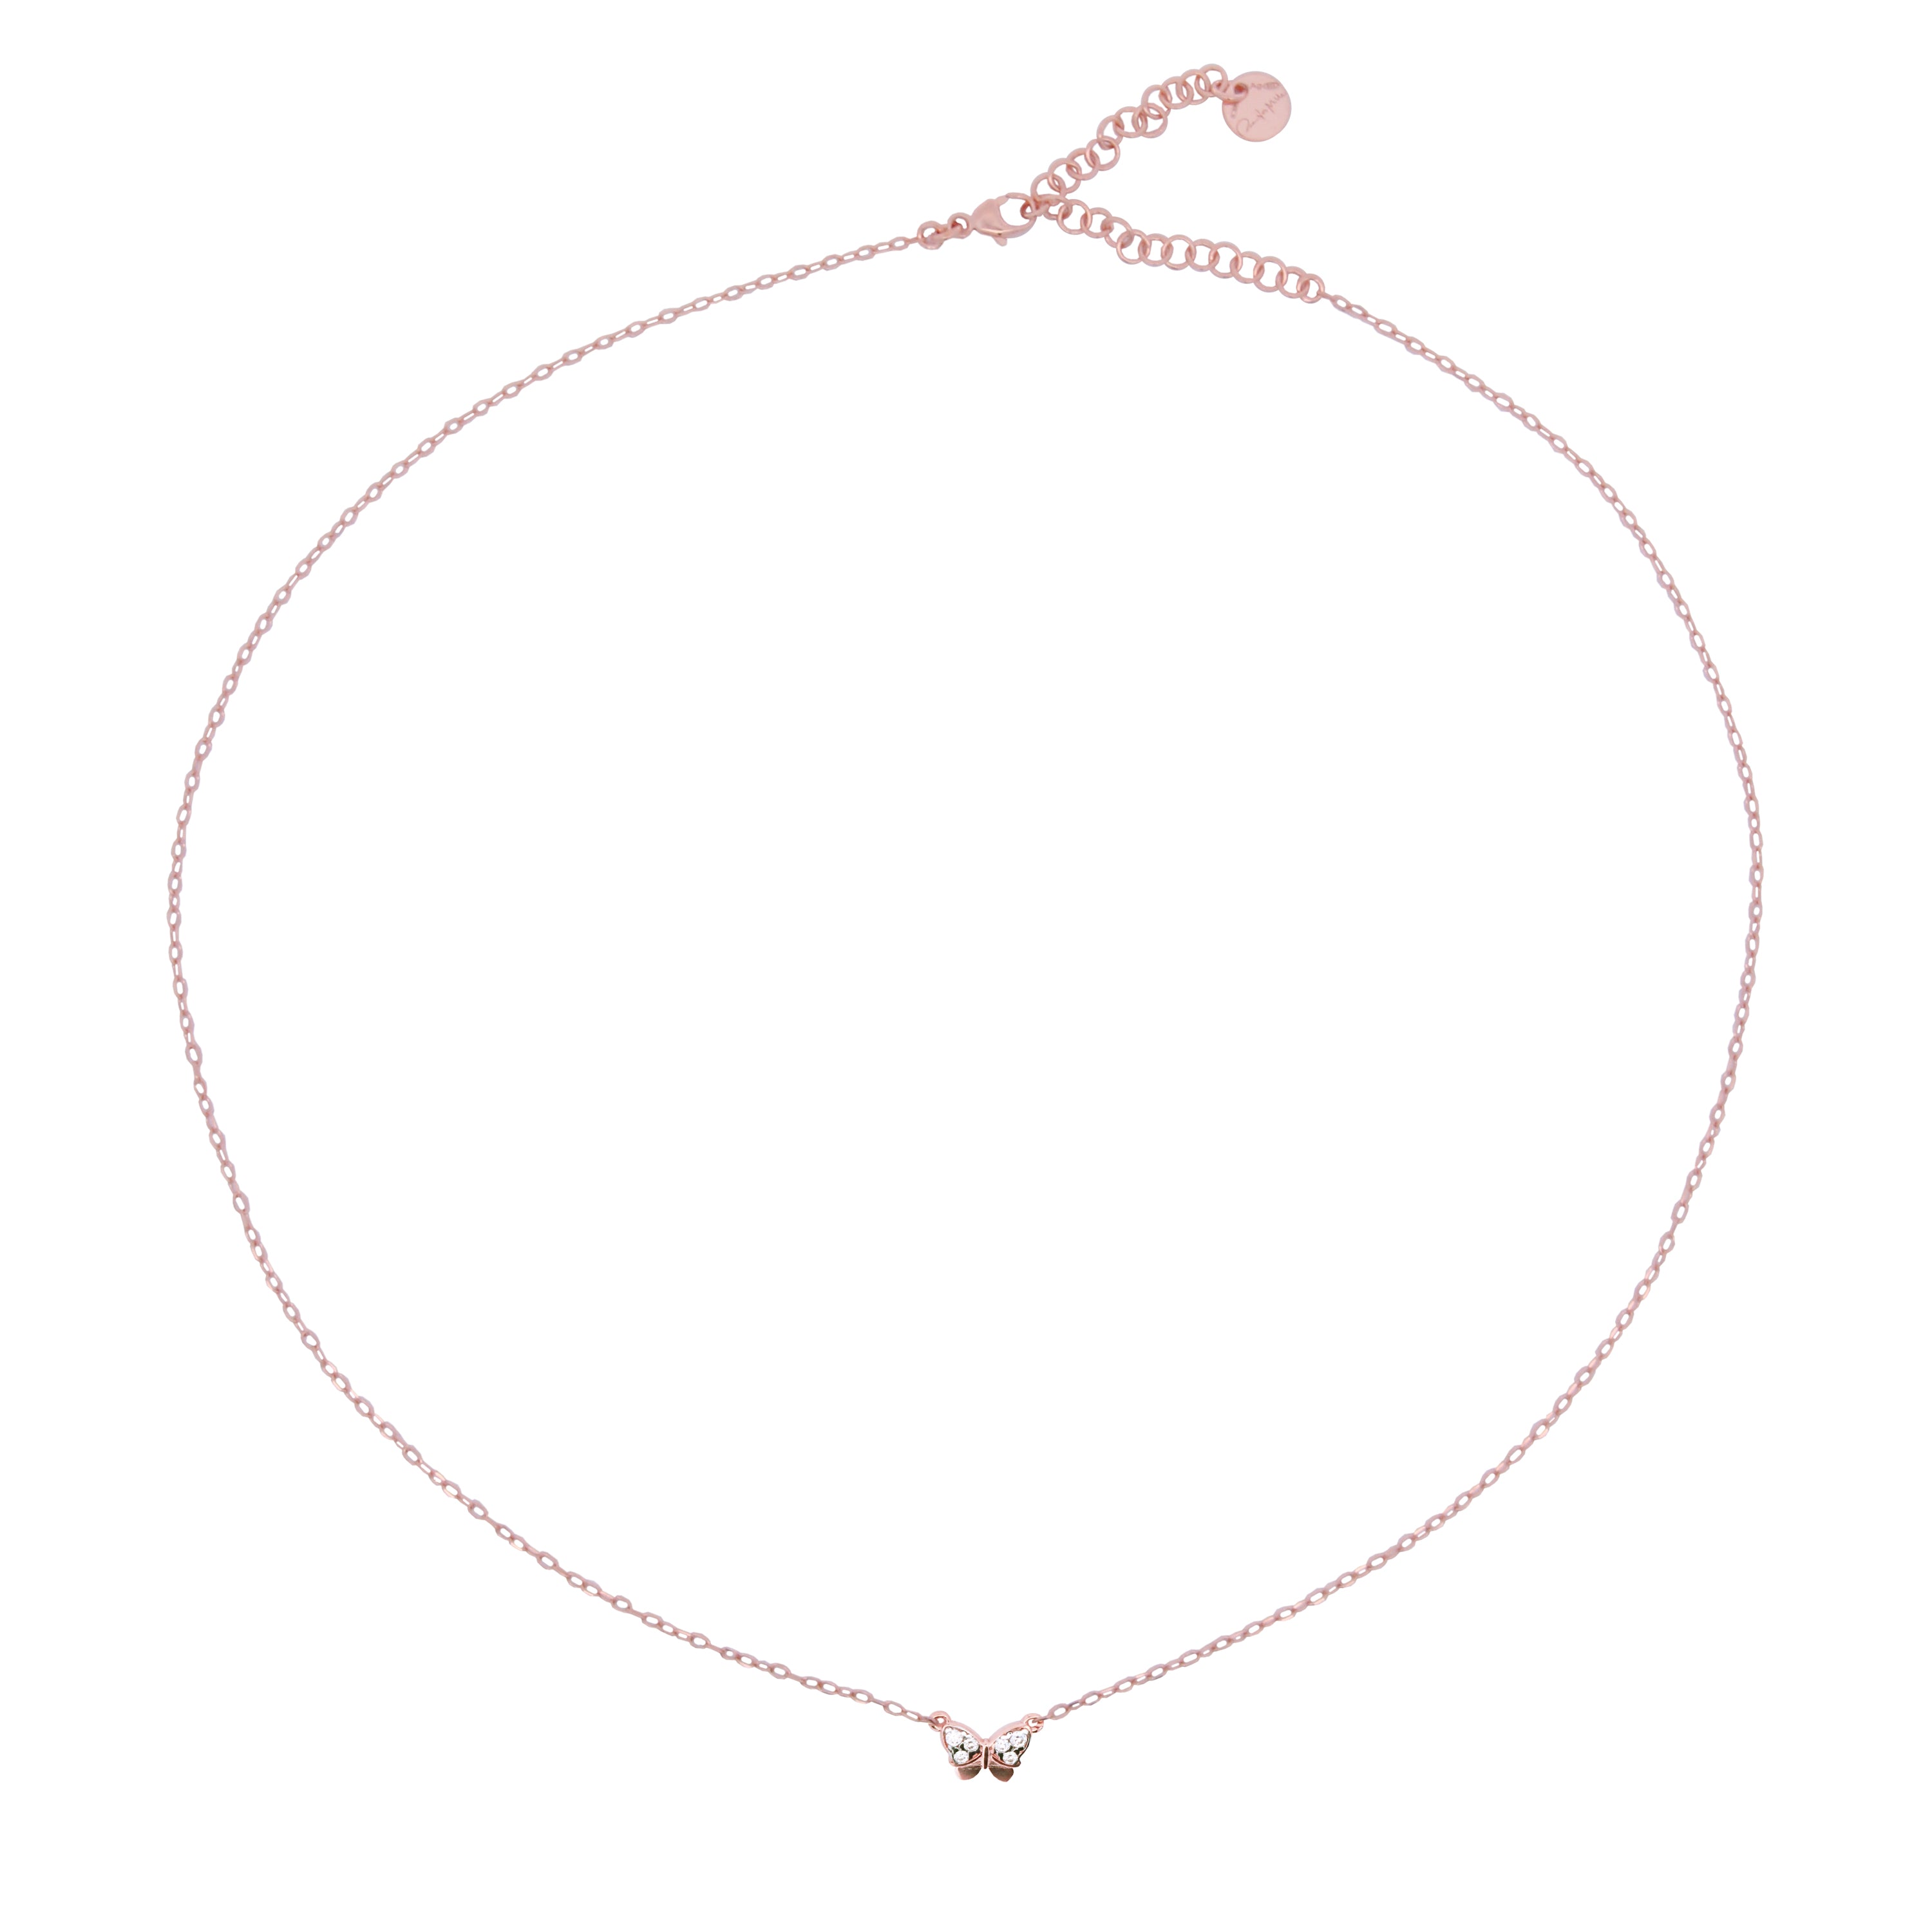 Chokers - Butterfly chain choker - Fly&Shine - 2 | Rue des Mille